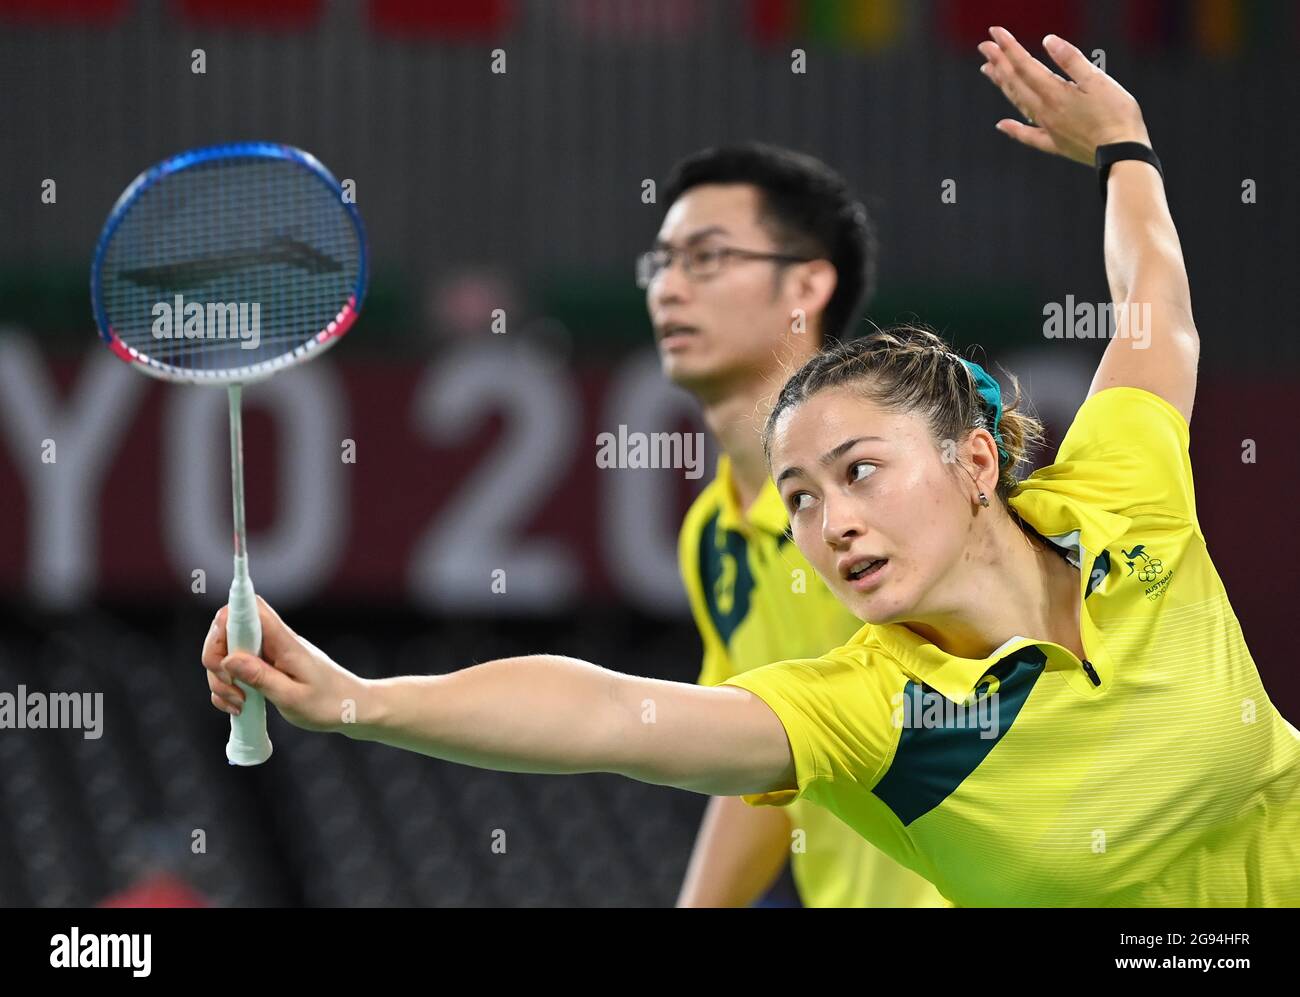 Tokyo, Japan. 24th July, 2021. Badminton. Musashino Forest Sport Plaza. 290-11. Nishimachi. Chofu-shi. Tokyo. Gronya Somerville (AUS) during the mixed doubles group stage